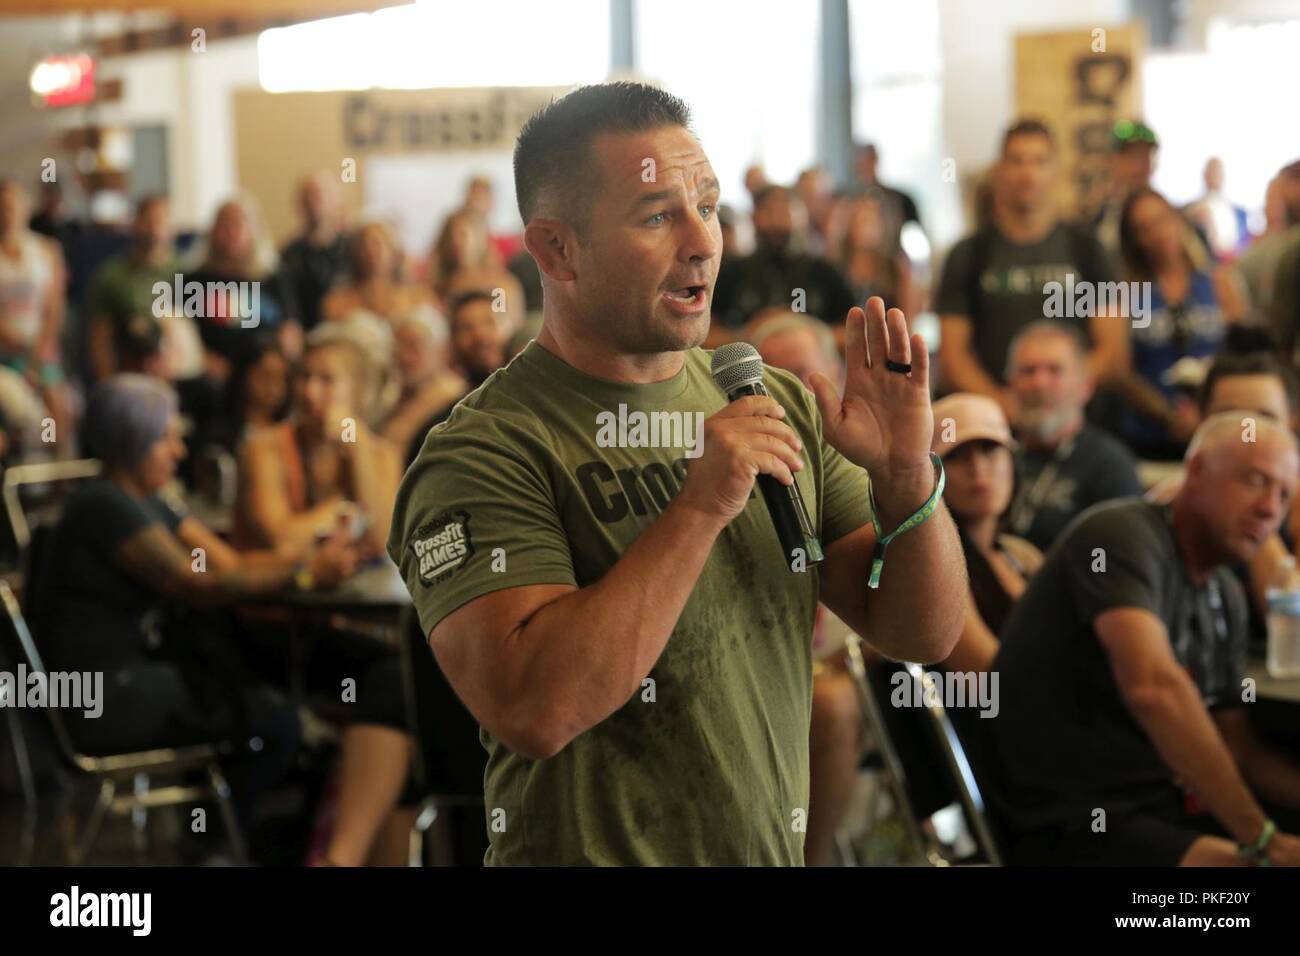 Jimi Letchford, Marine veteran and Global Brand Manager for CrossFit,  speaks to CrossFit affiliates at a reception during the 2018 Reebok  CrossFit Games in Madison, Wisconsin, August 2, 2018. The CrossFit Games